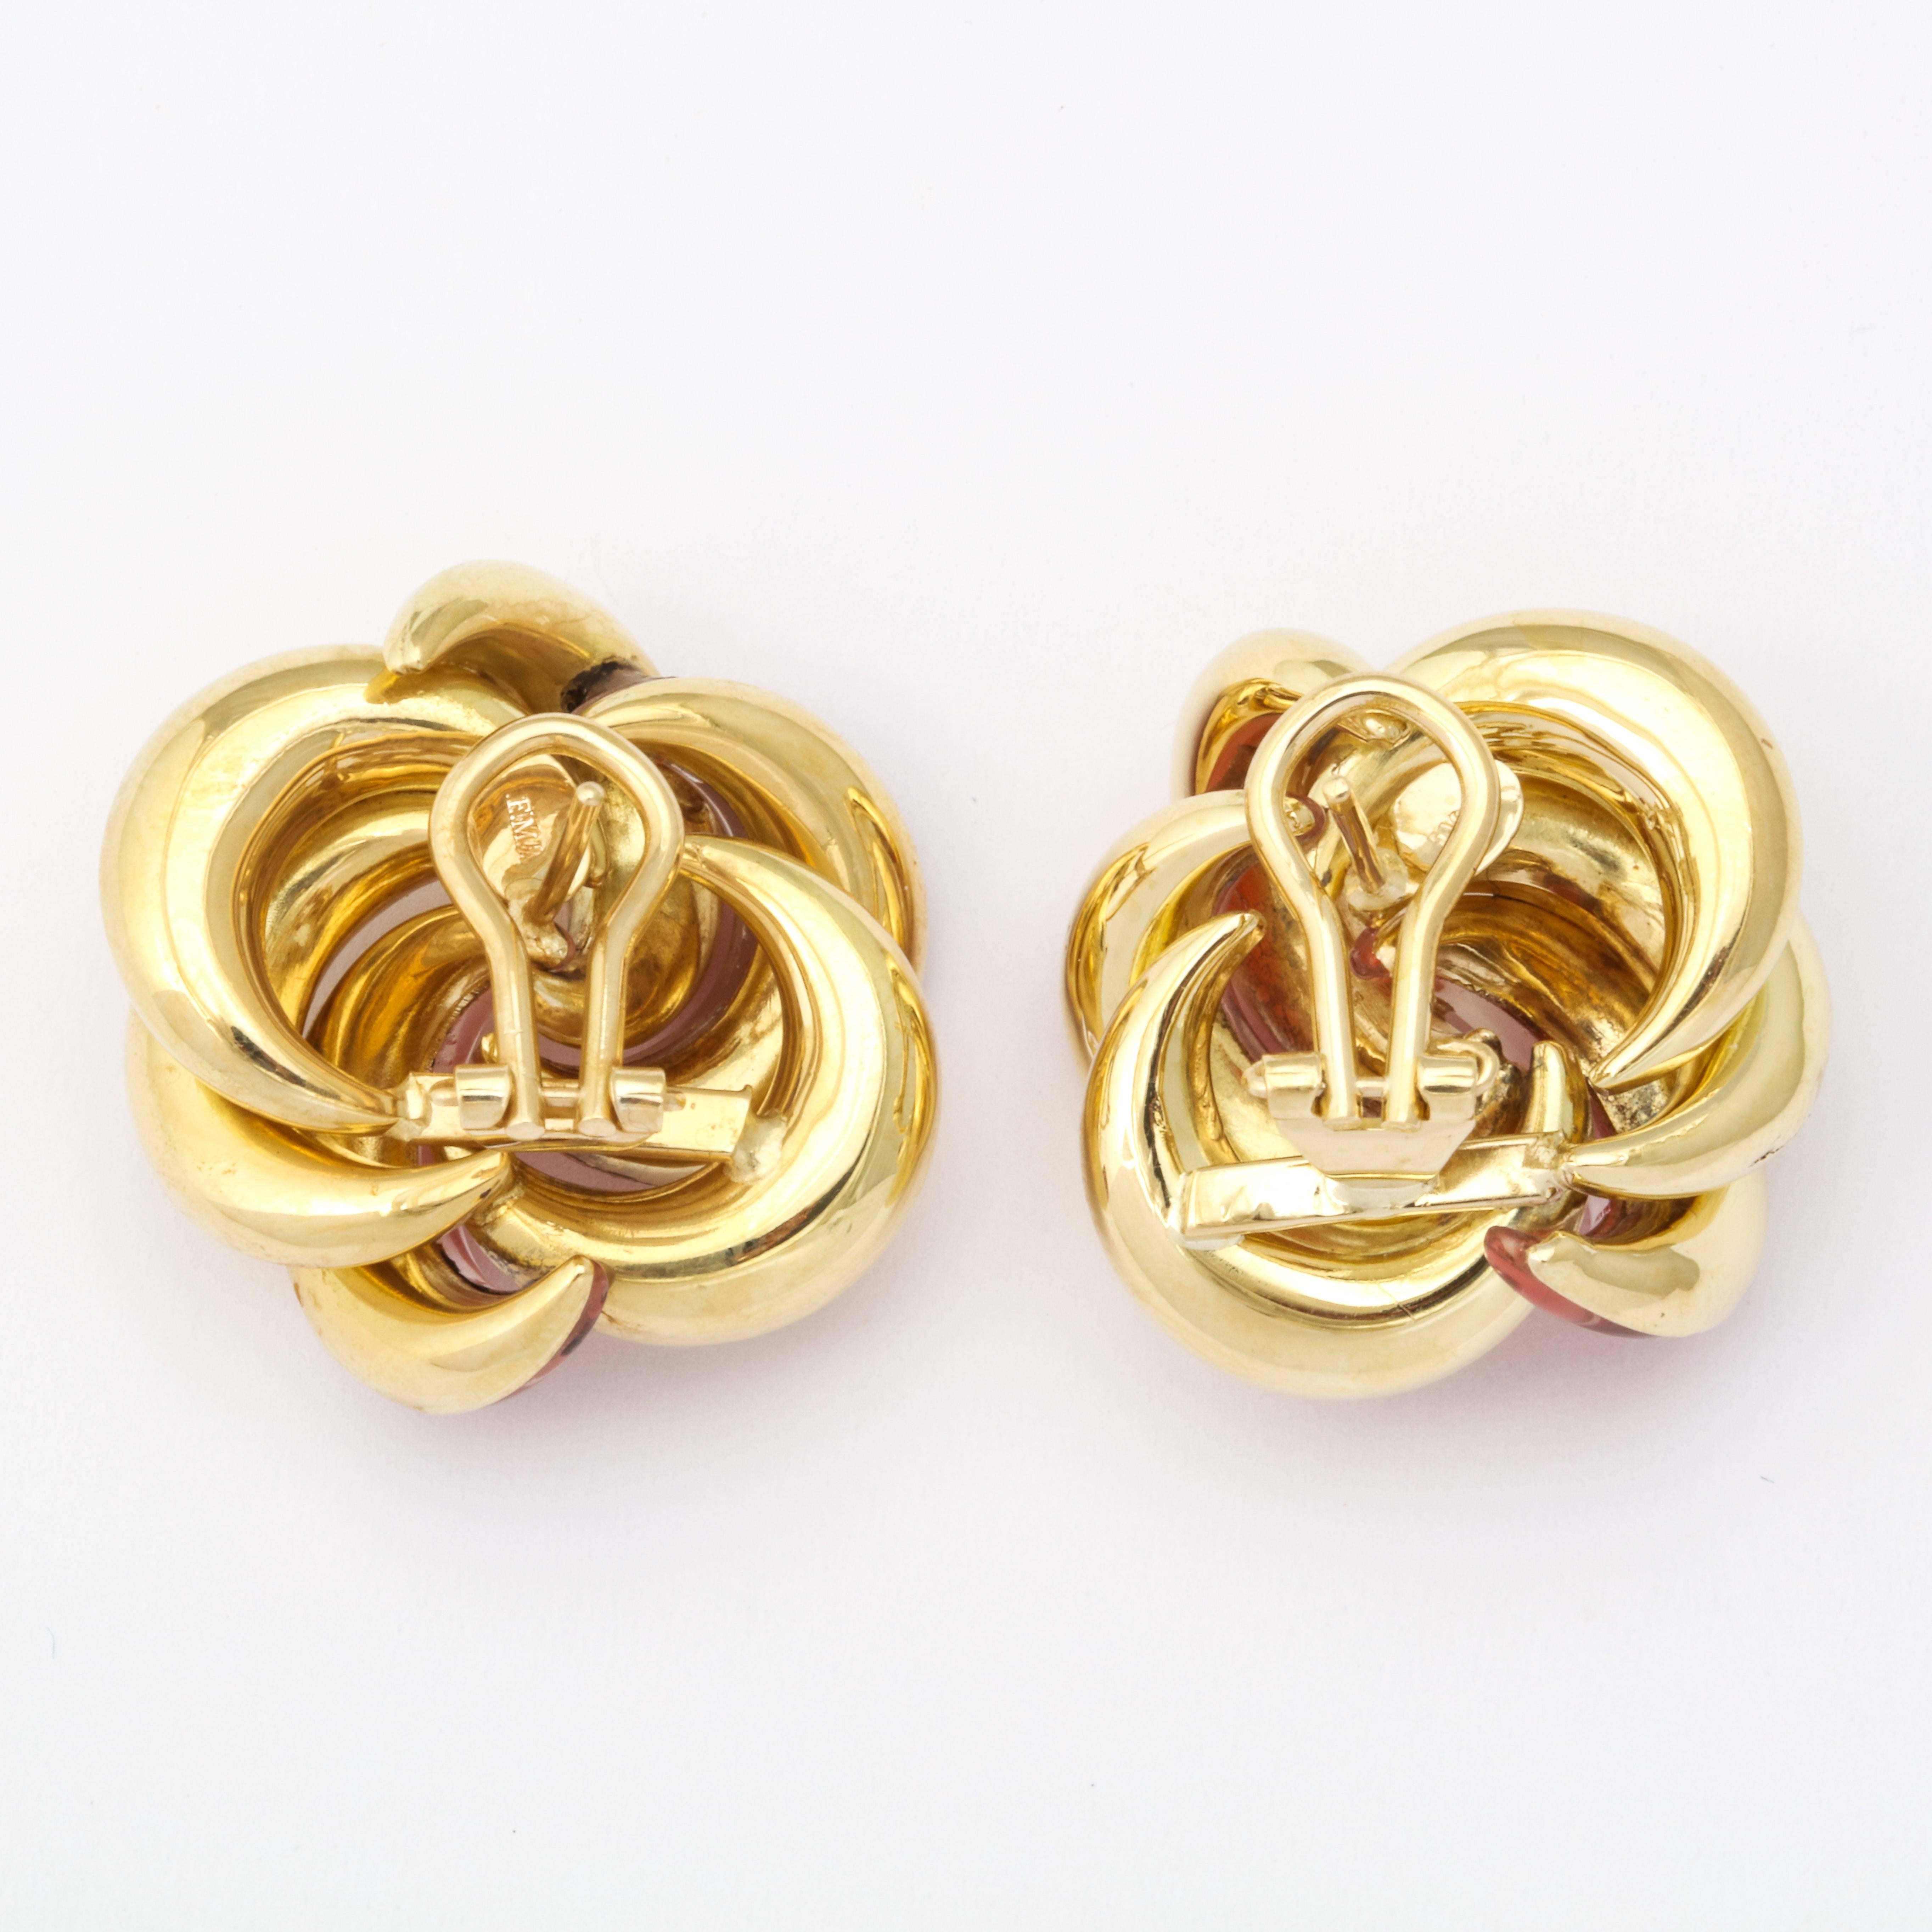 Faraone Mennella Roselline Coral Gold Earrings In New Condition For Sale In New York, NY